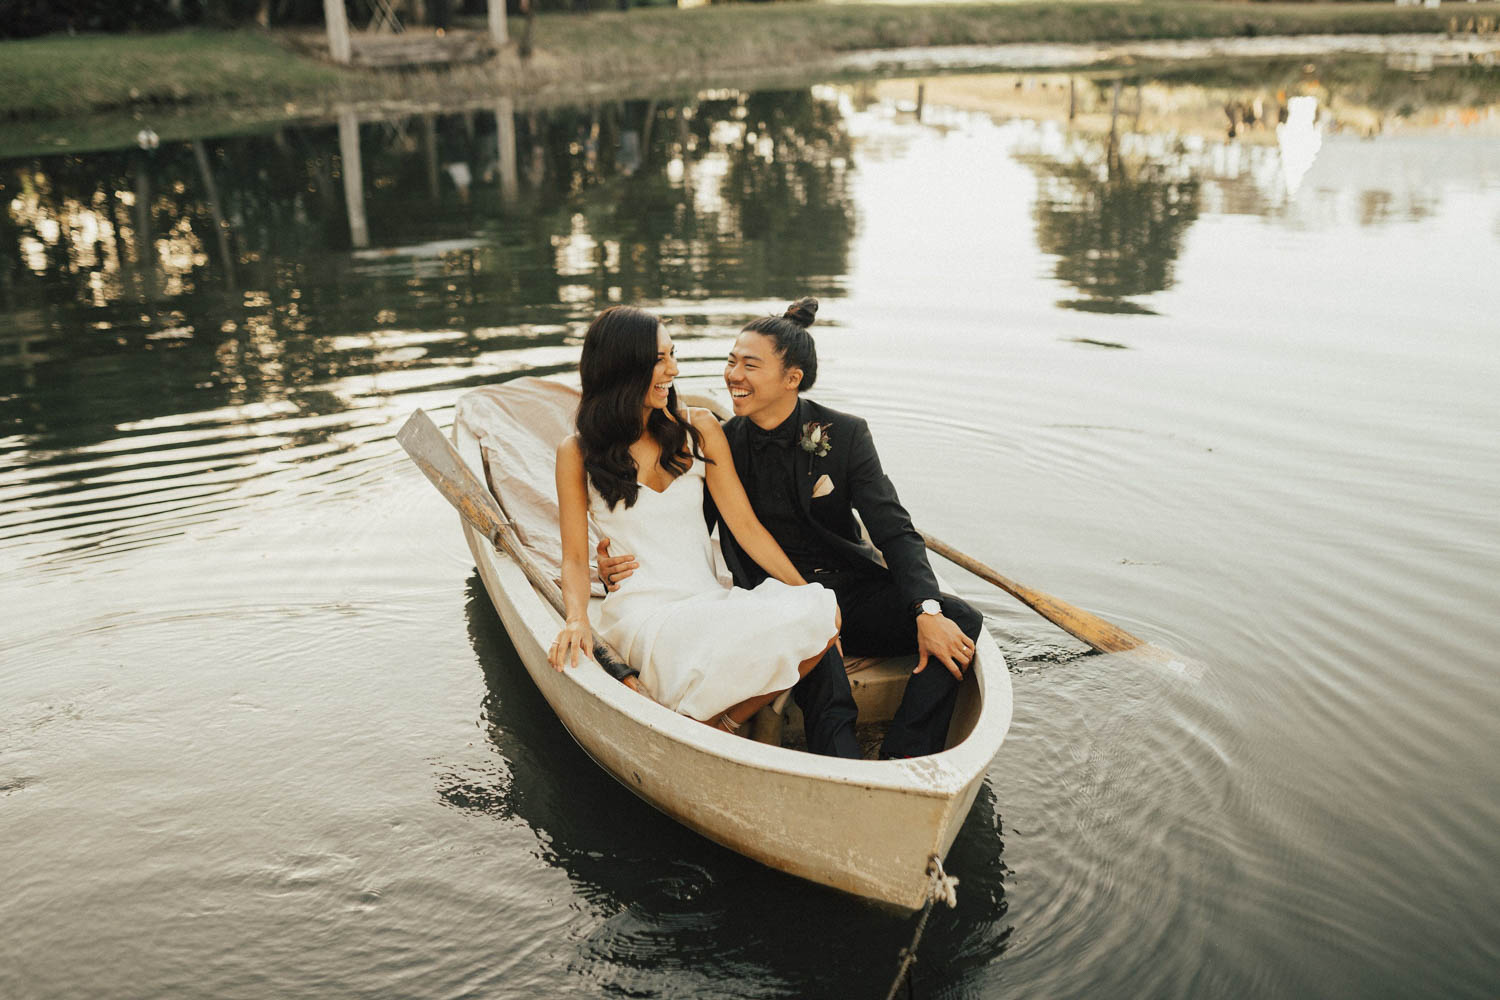 Bride and groom in boat / wedding photography